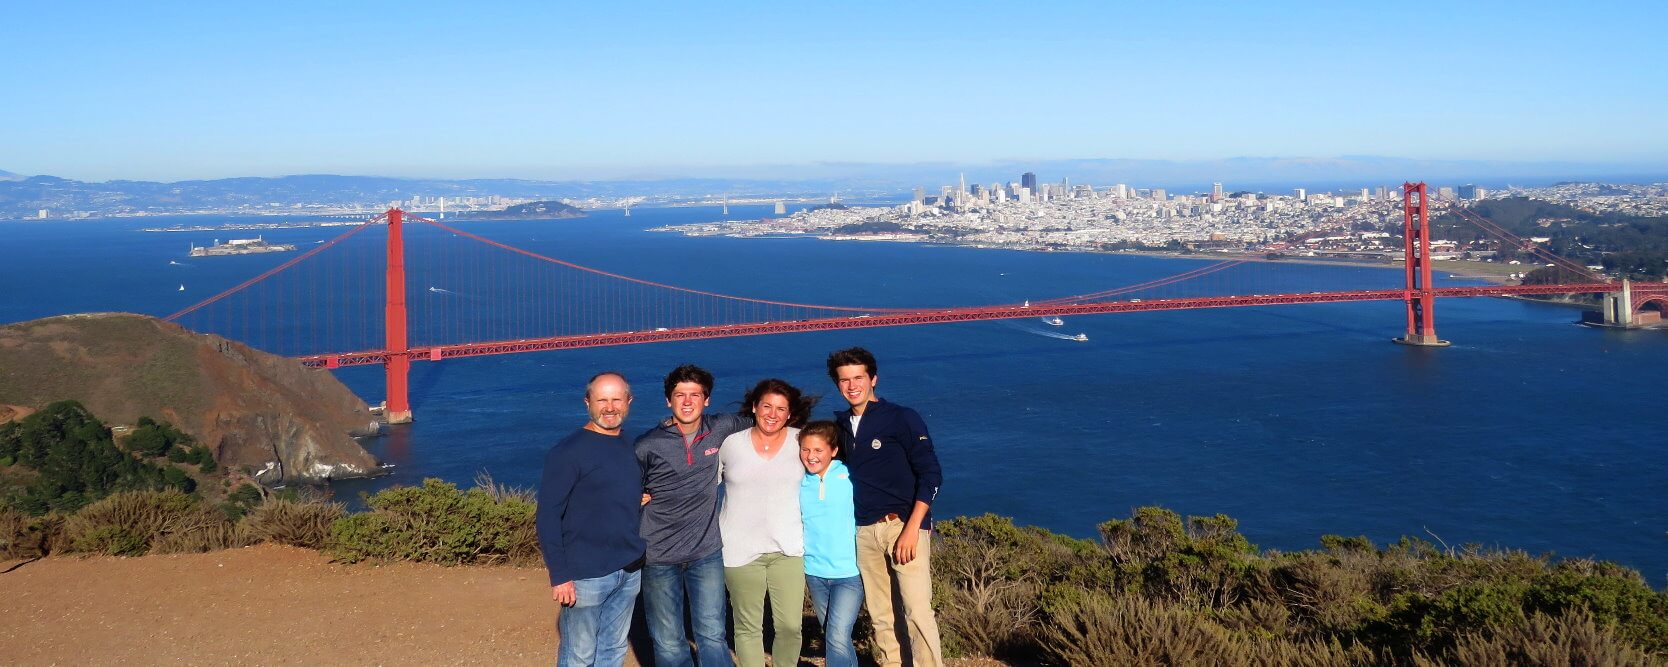 san_francisco_familly_tour_packages